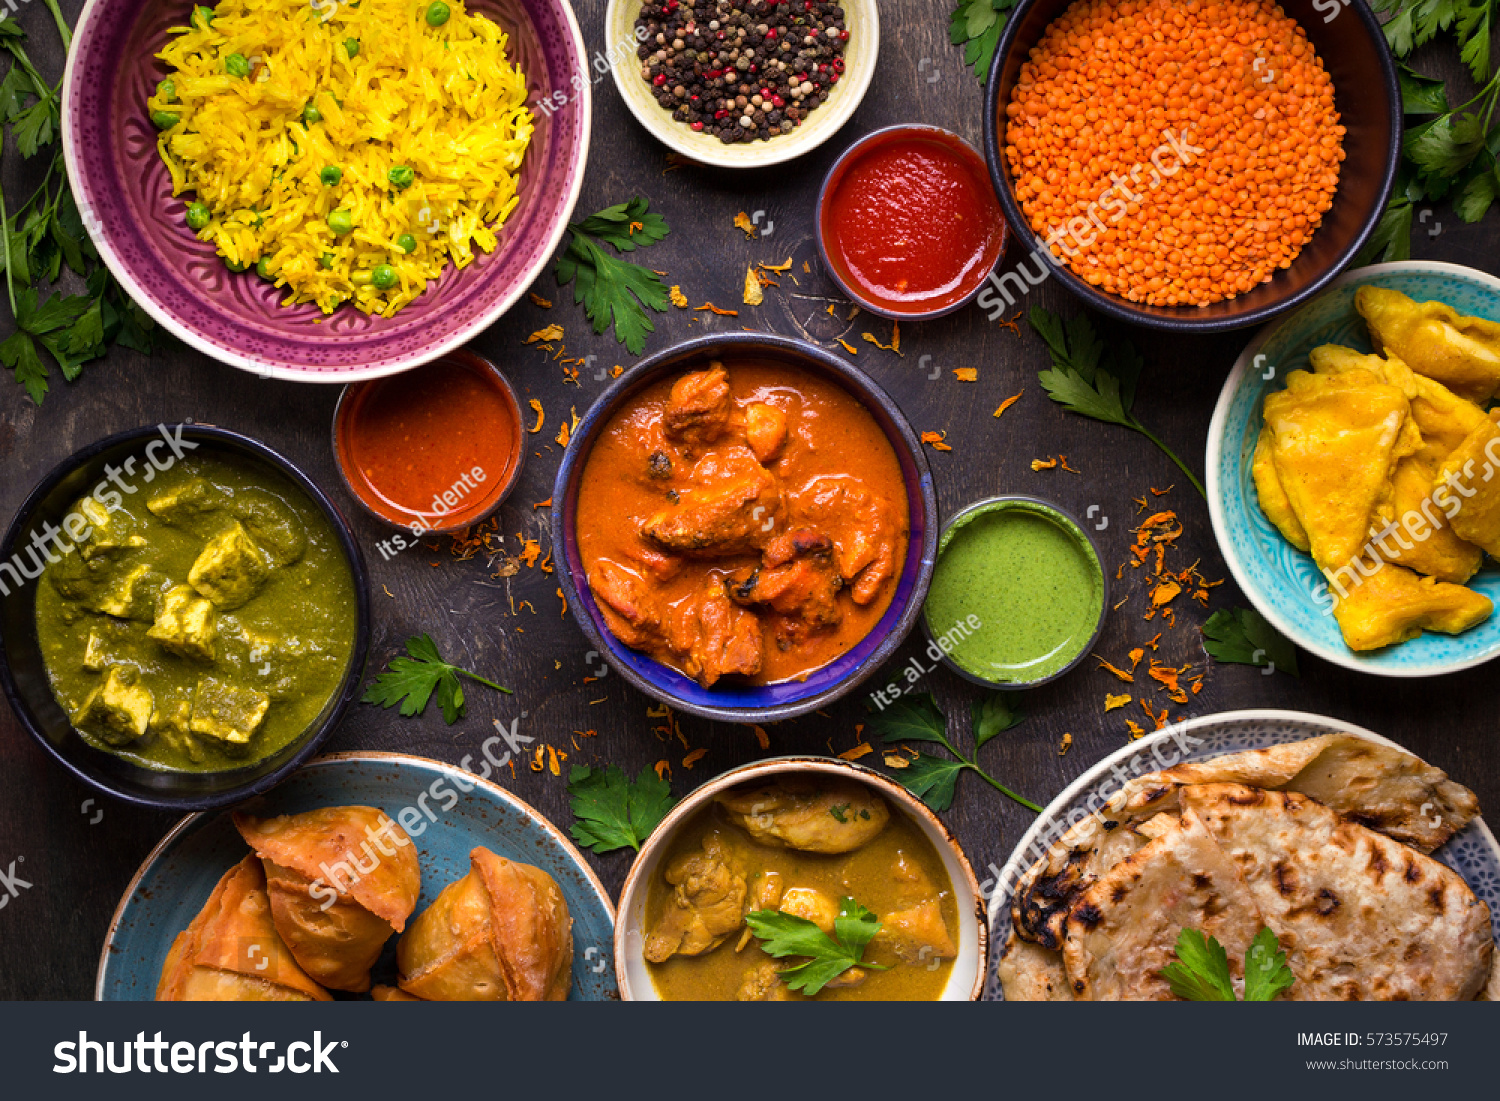 Assorted indian food on dark wooden background. Dishes and appetizers of indian cuisine. Curry, butter chicken, rice, lentils, paneer, samosa, naan, chutney, spices. Bowls and plates with indian food #573575497